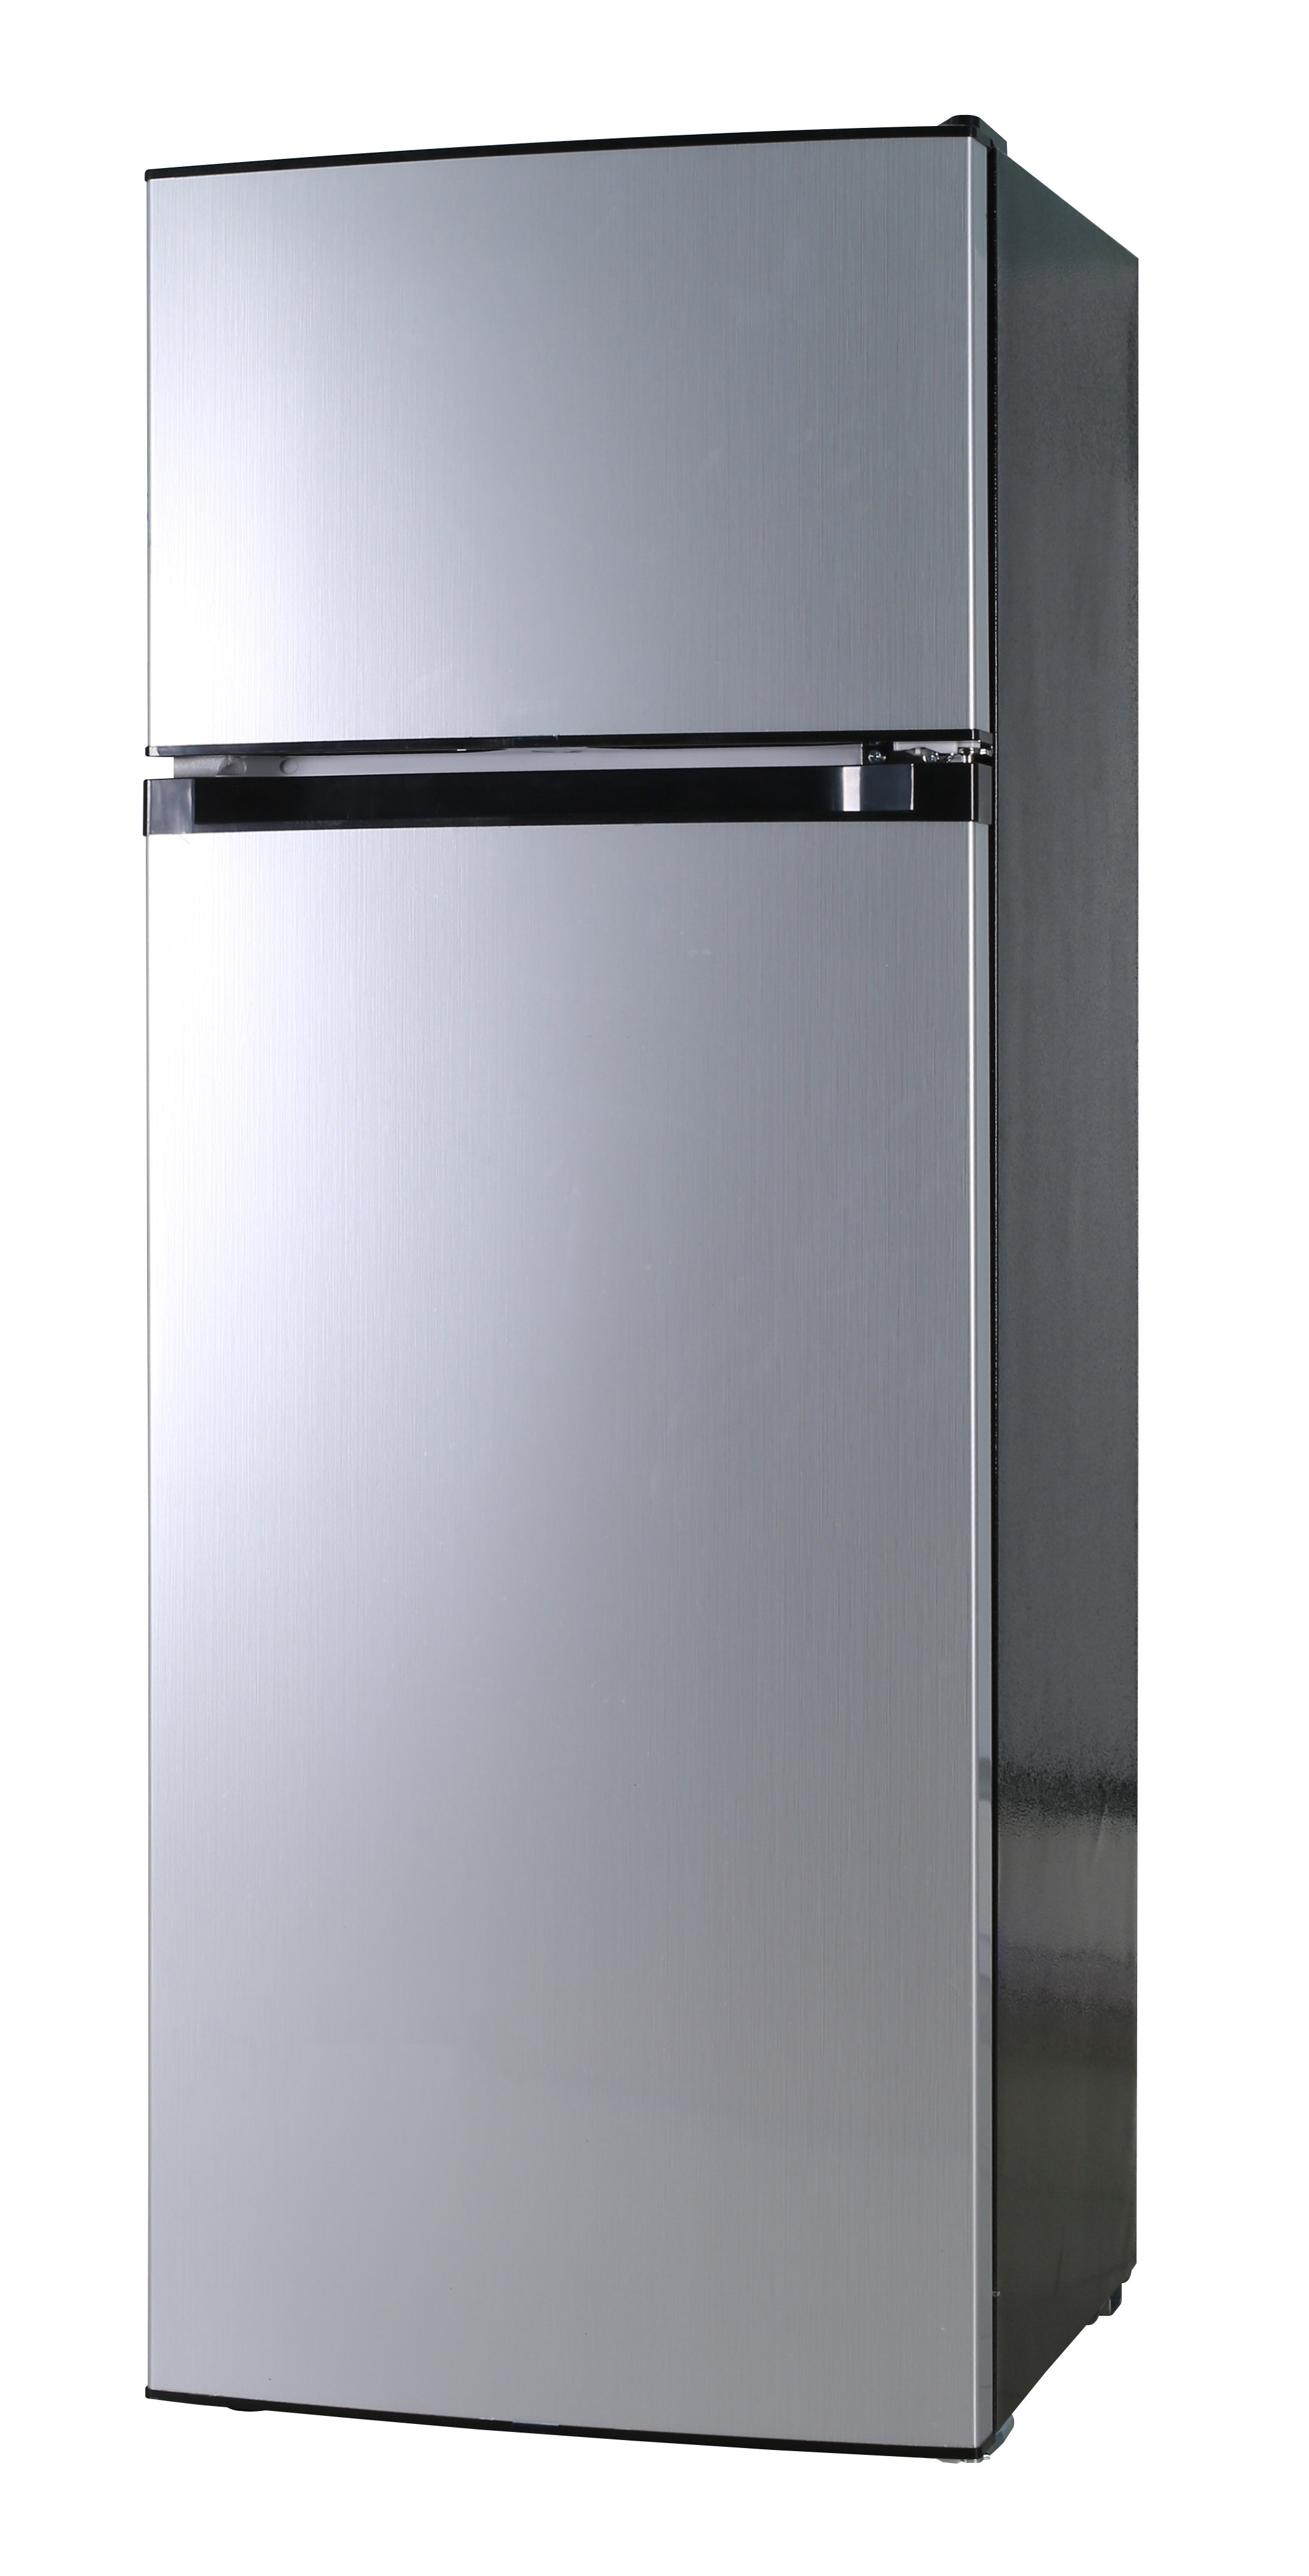 7.5 CU.FT REFRIGERATOR WITH FREEZER - BLACK AND STAINLESS ST - small  appliances